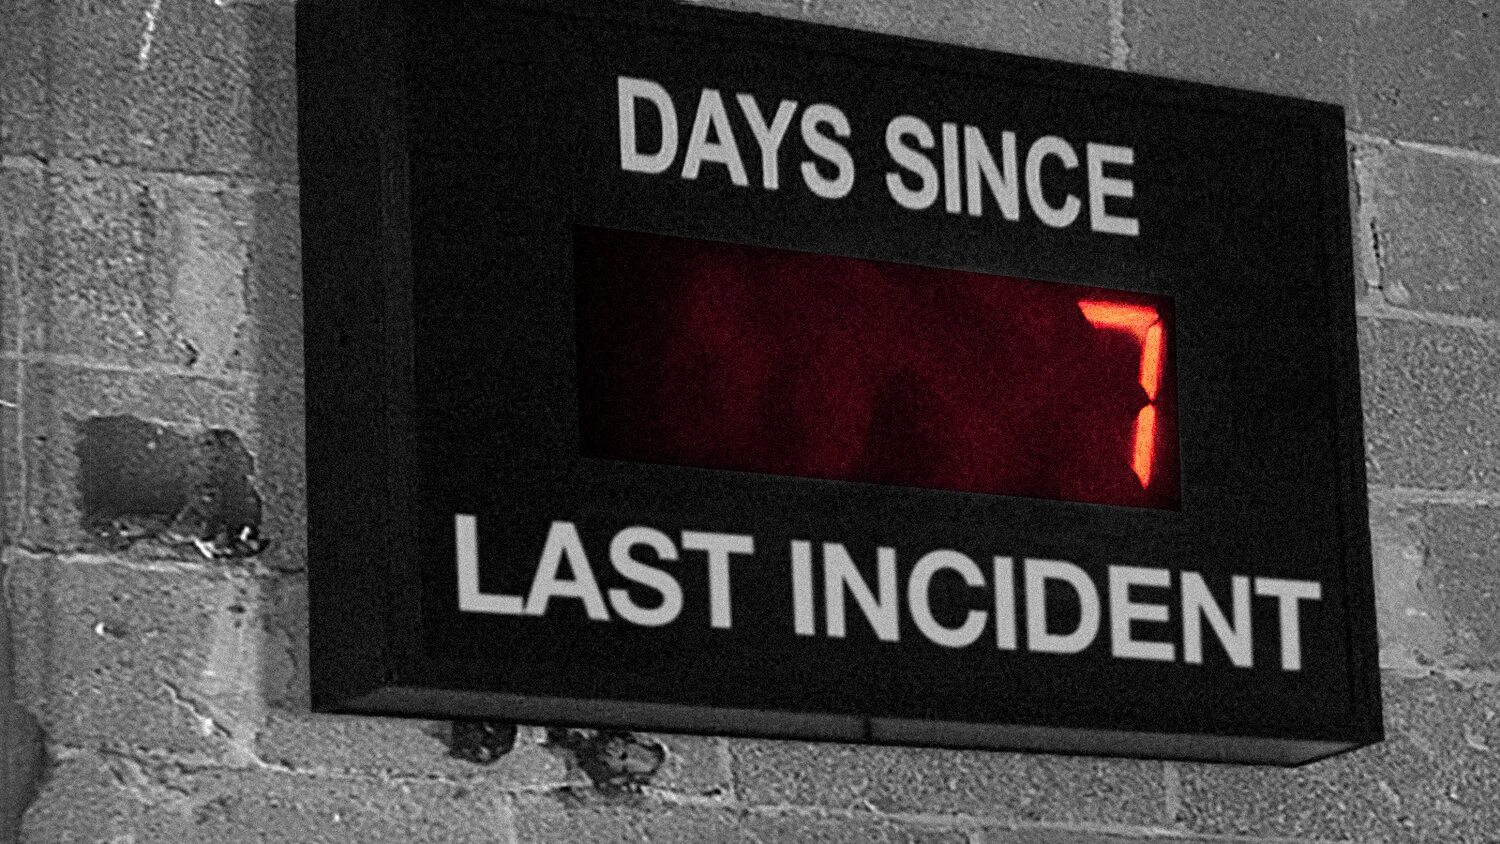 Incident sign. Days since last incident. Without incident.